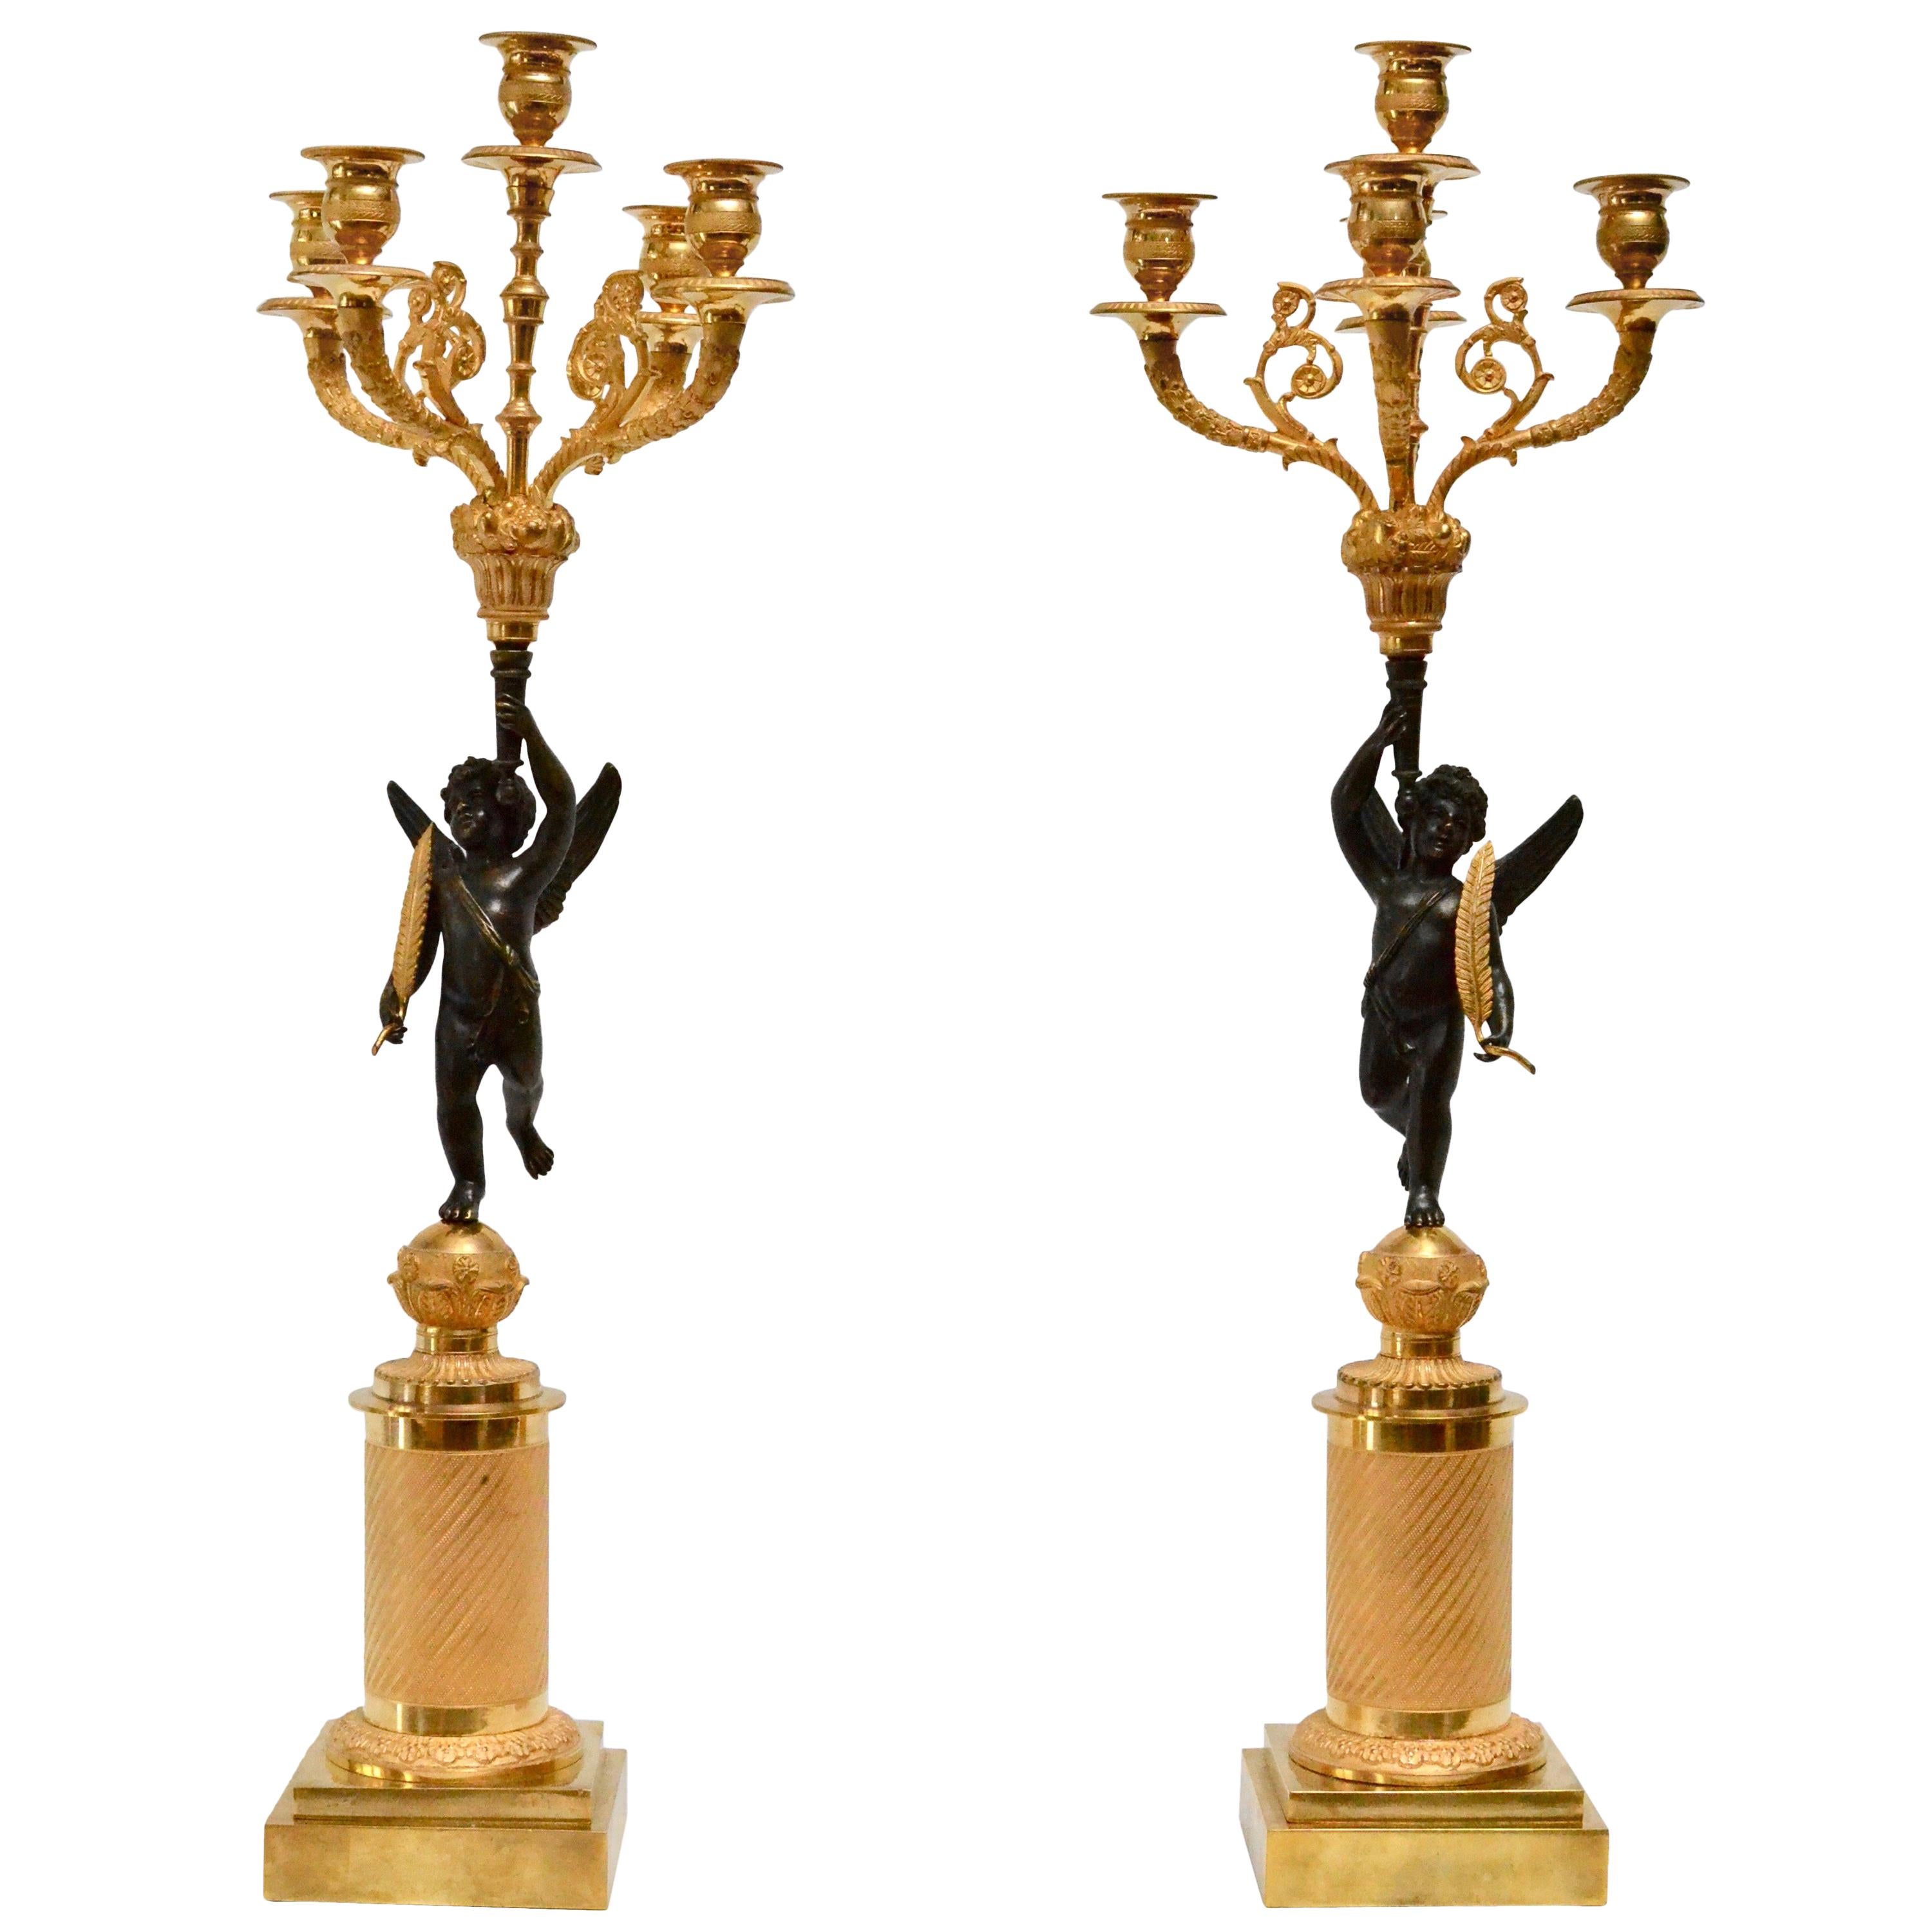 Pair of Gilt and Patinated Empire Candelabra, Early 19th Century